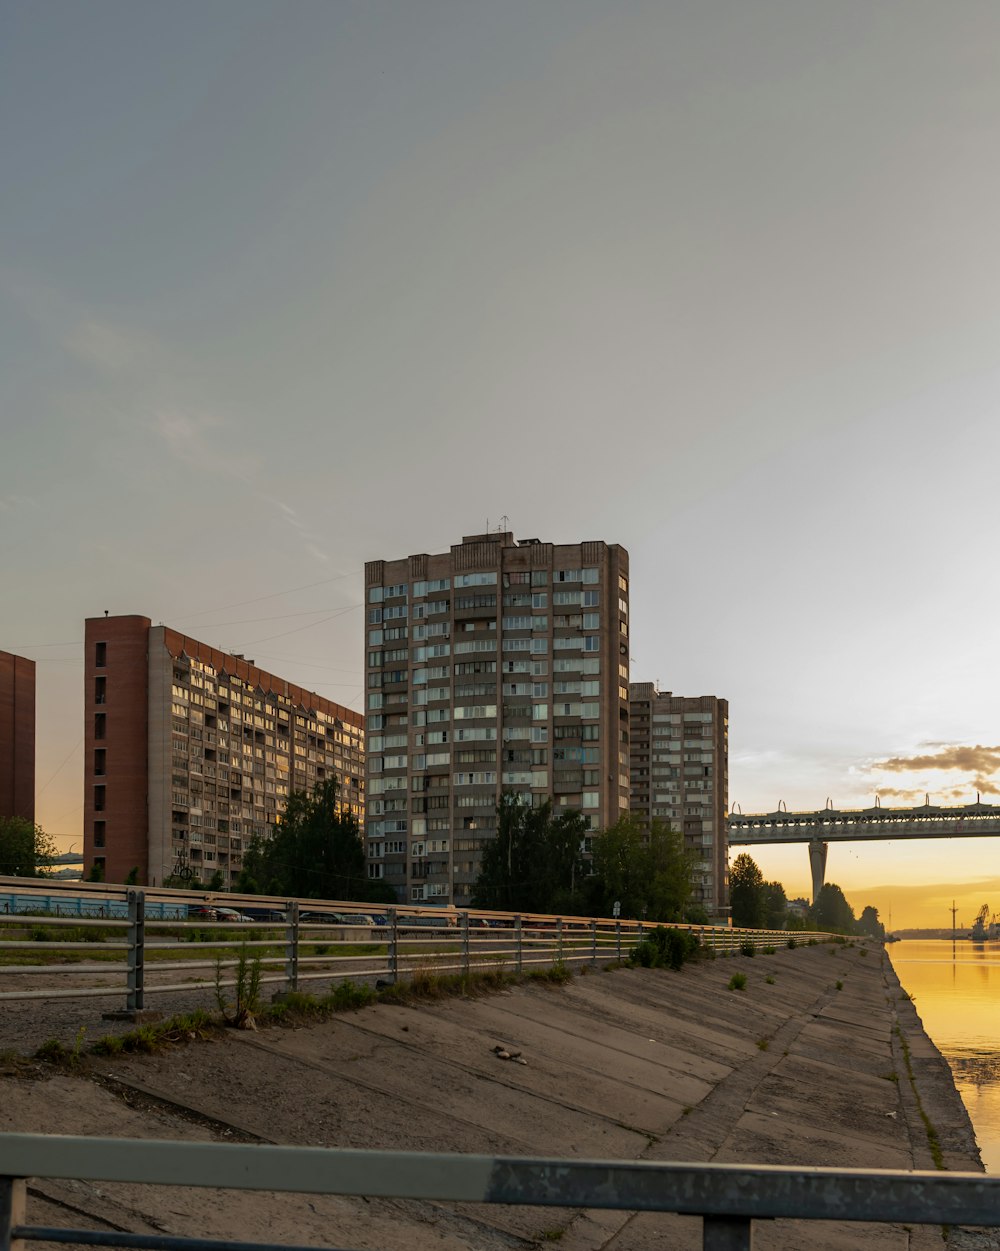 a bridge over a body of water next to tall buildings